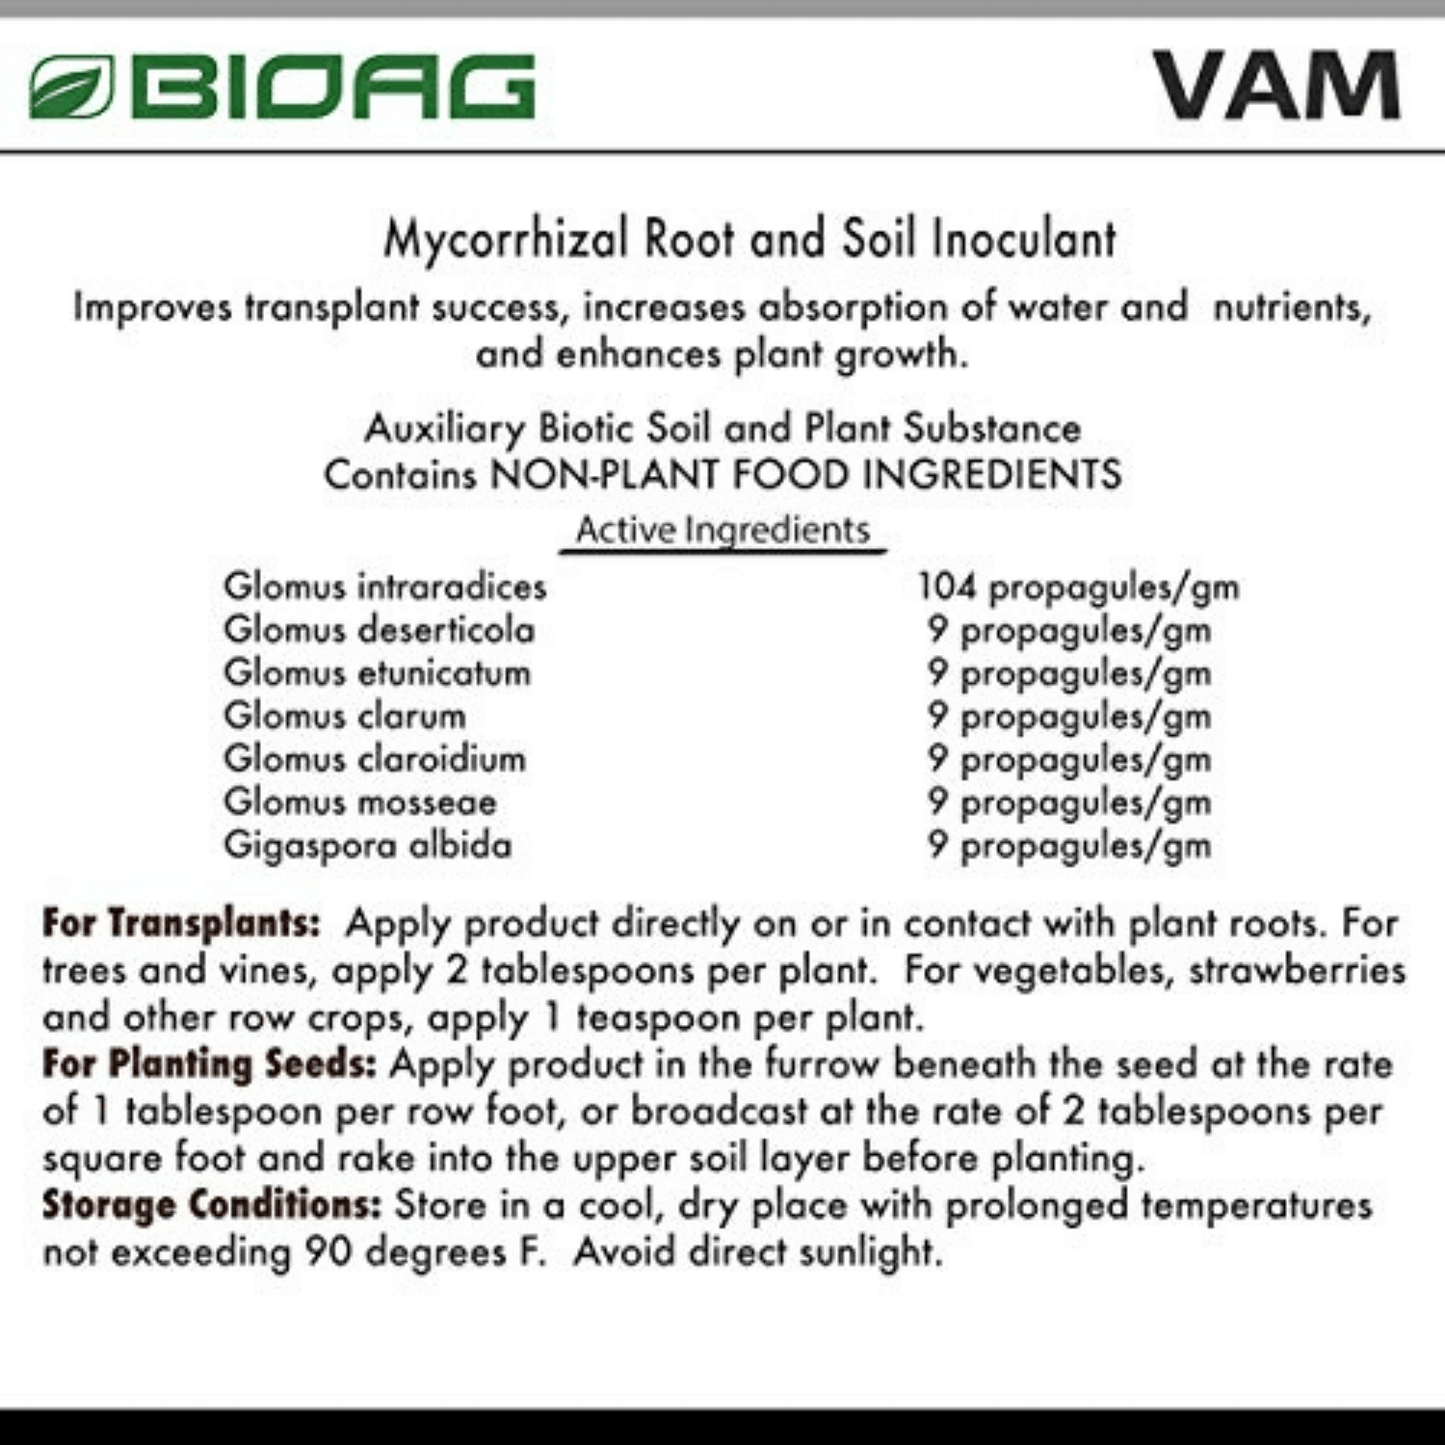 BioAg VAM Endo-Mix 7-Blend Mycorrhizal Root and Soil Inoculant, 5 lb Pouch BA78050 Planting & Watering